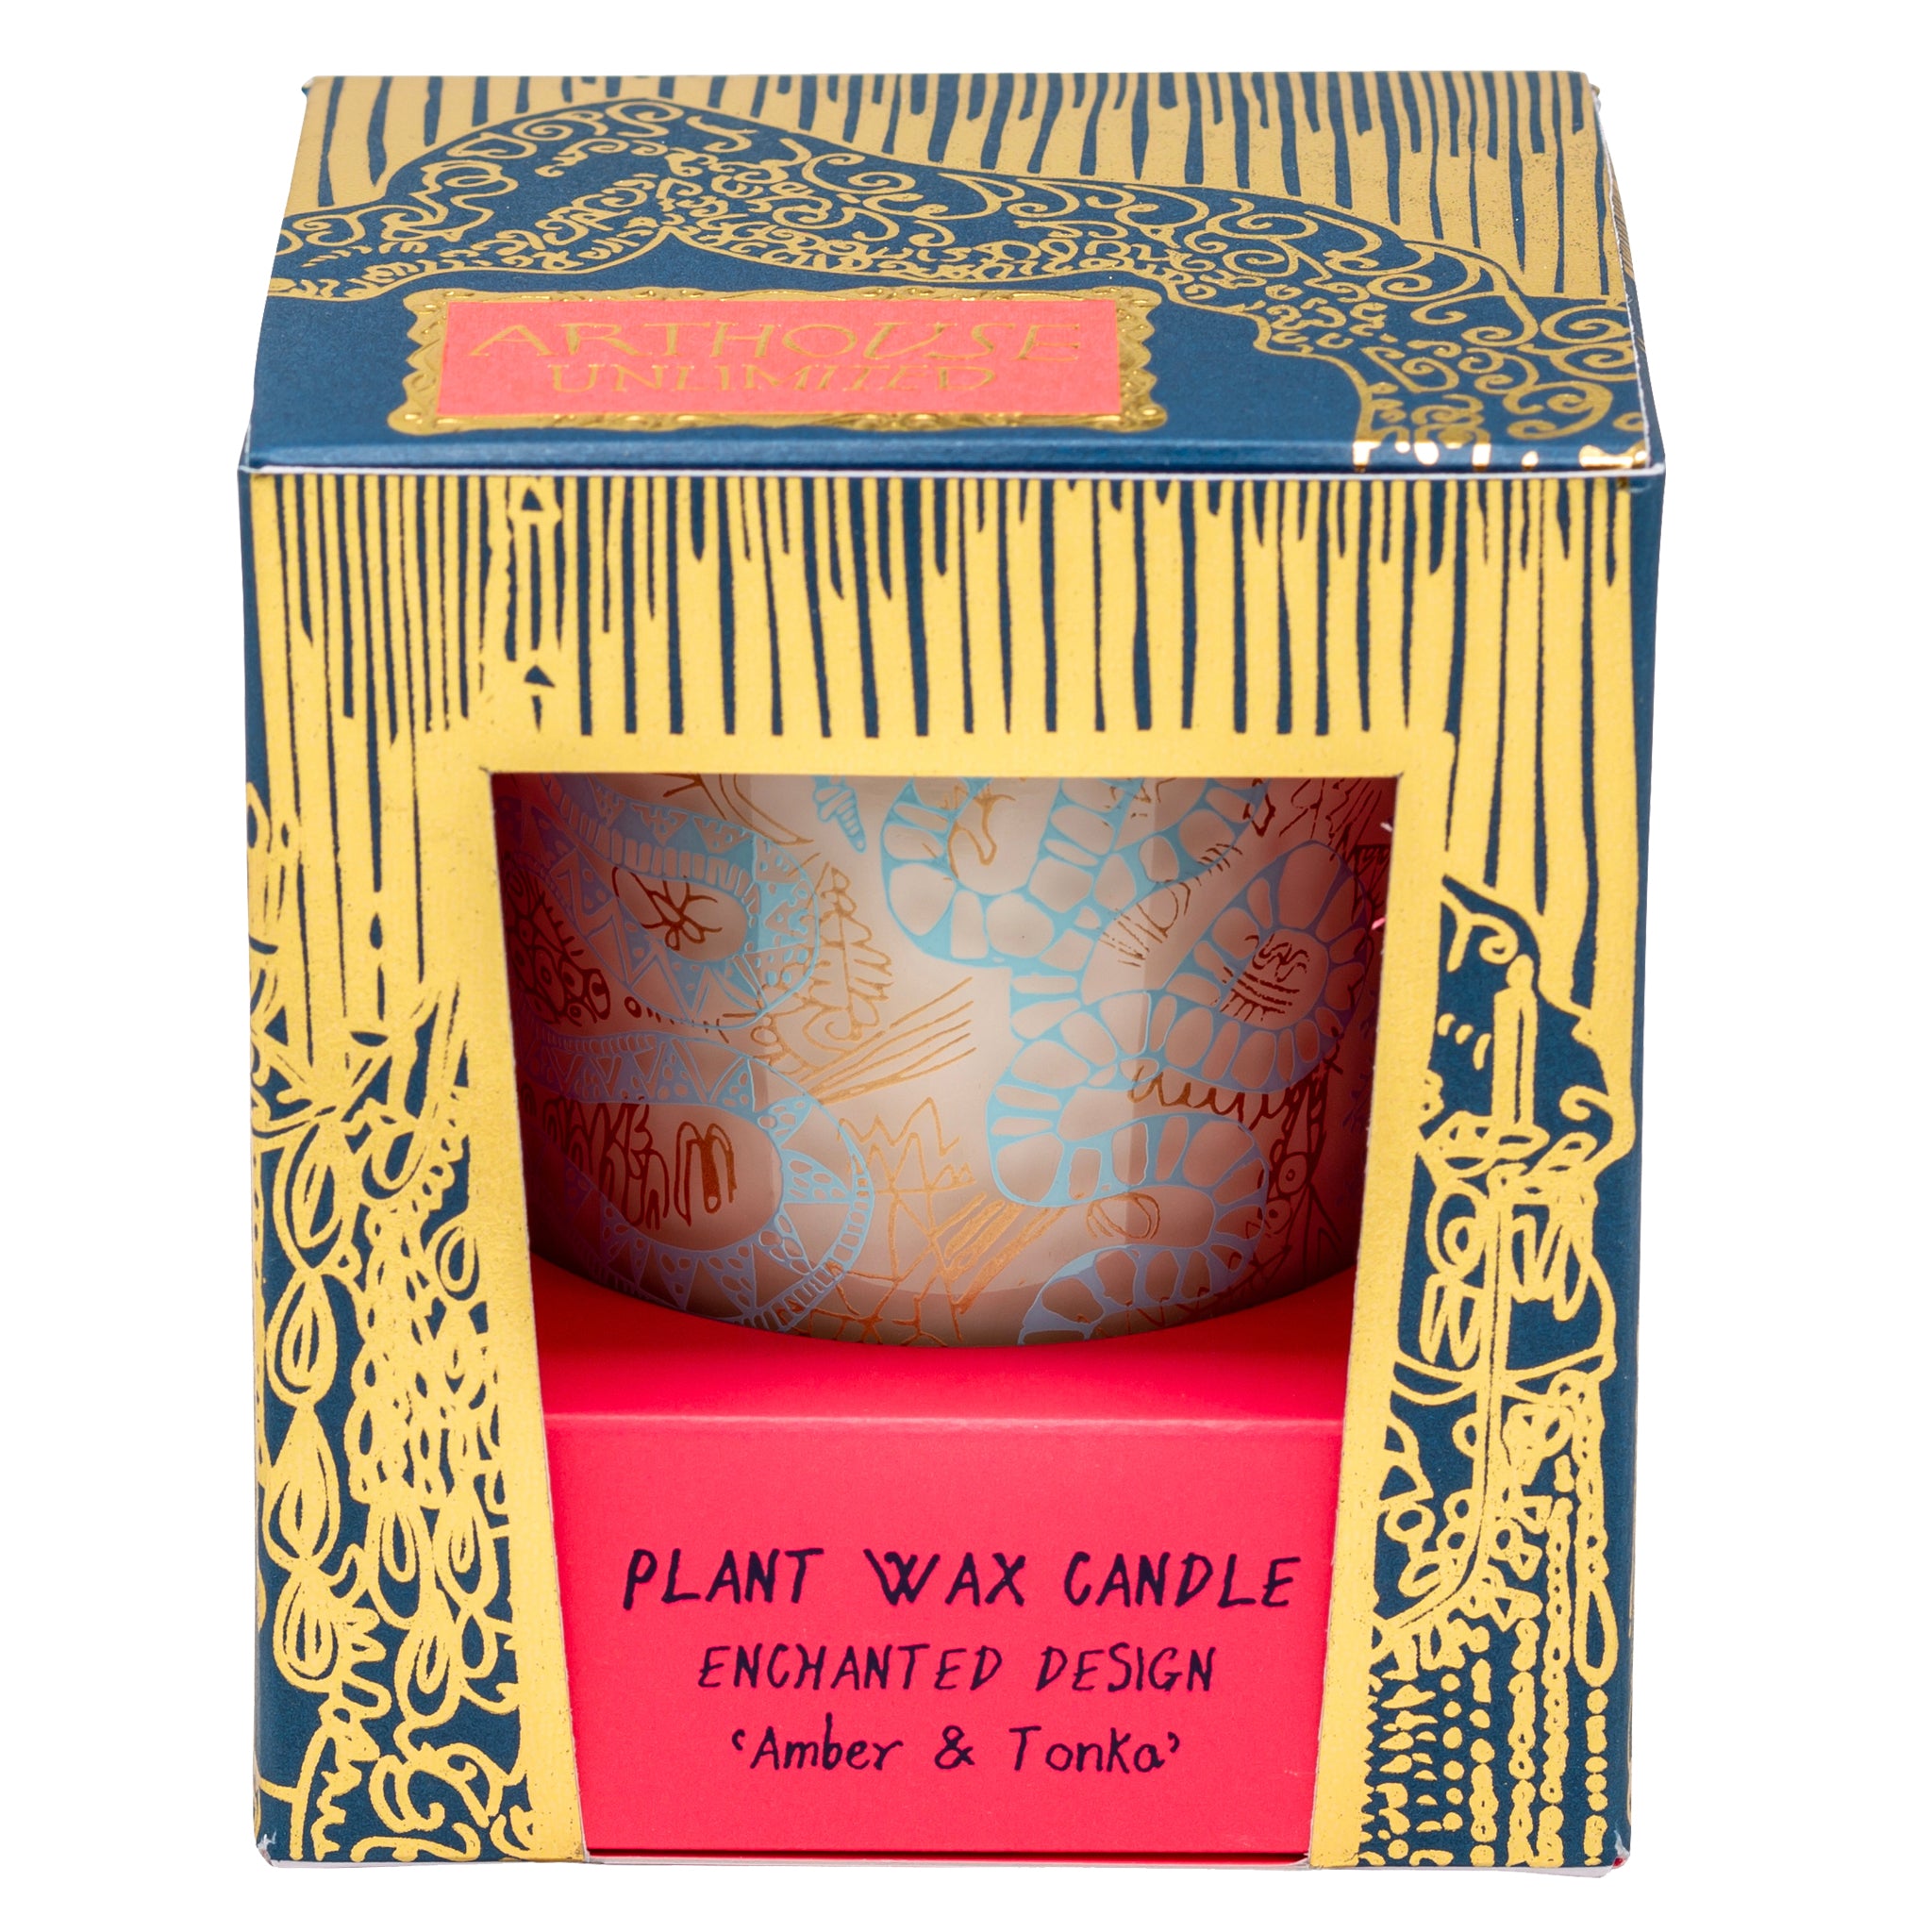 Enchanted, Amber & Tonka Bean Scented Plant Wax Candle in blue, pink and gold box